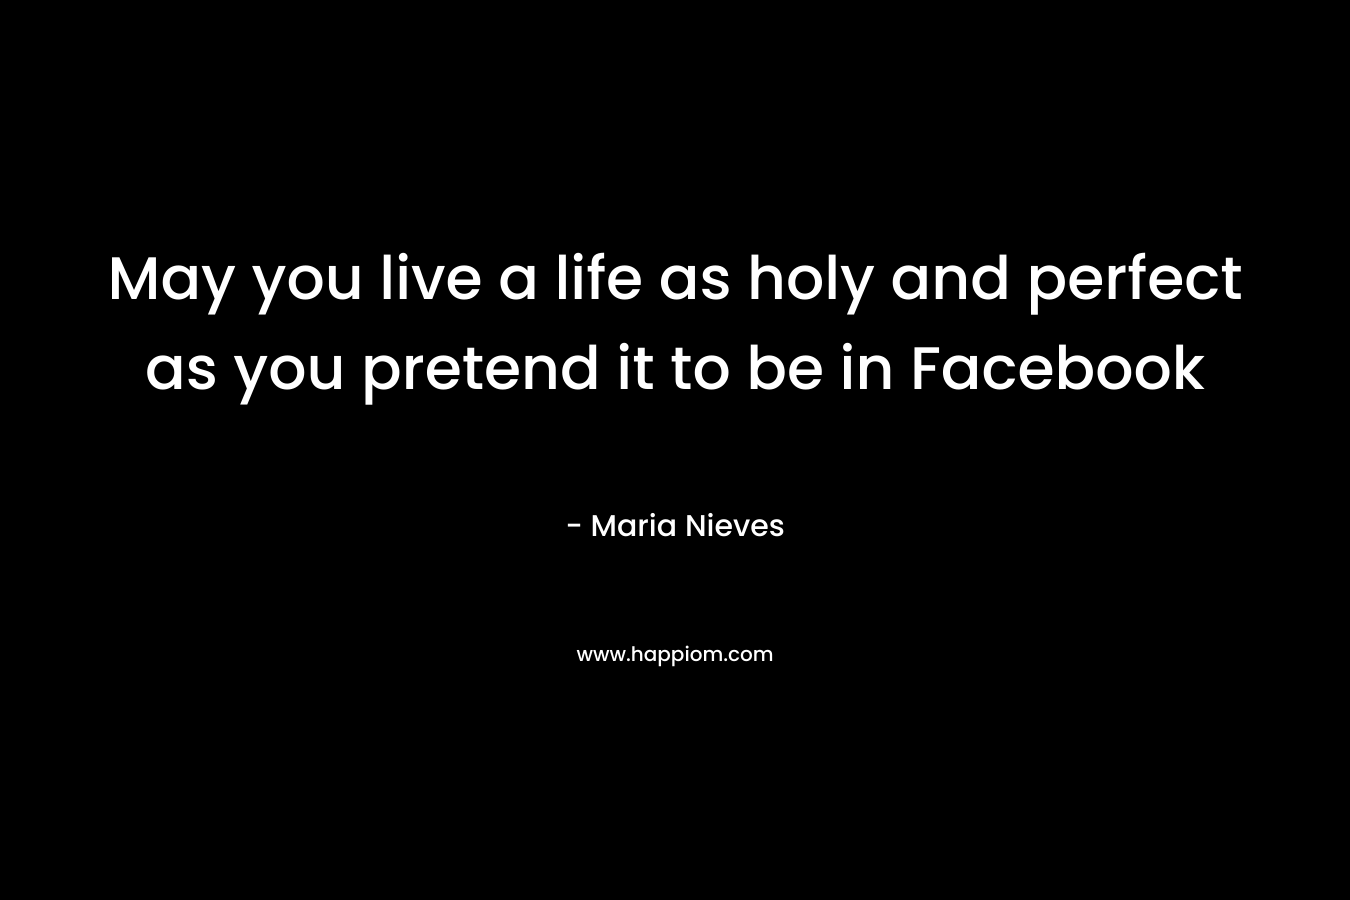 May you live a life as holy and perfect as you pretend it to be in Facebook – Maria Nieves